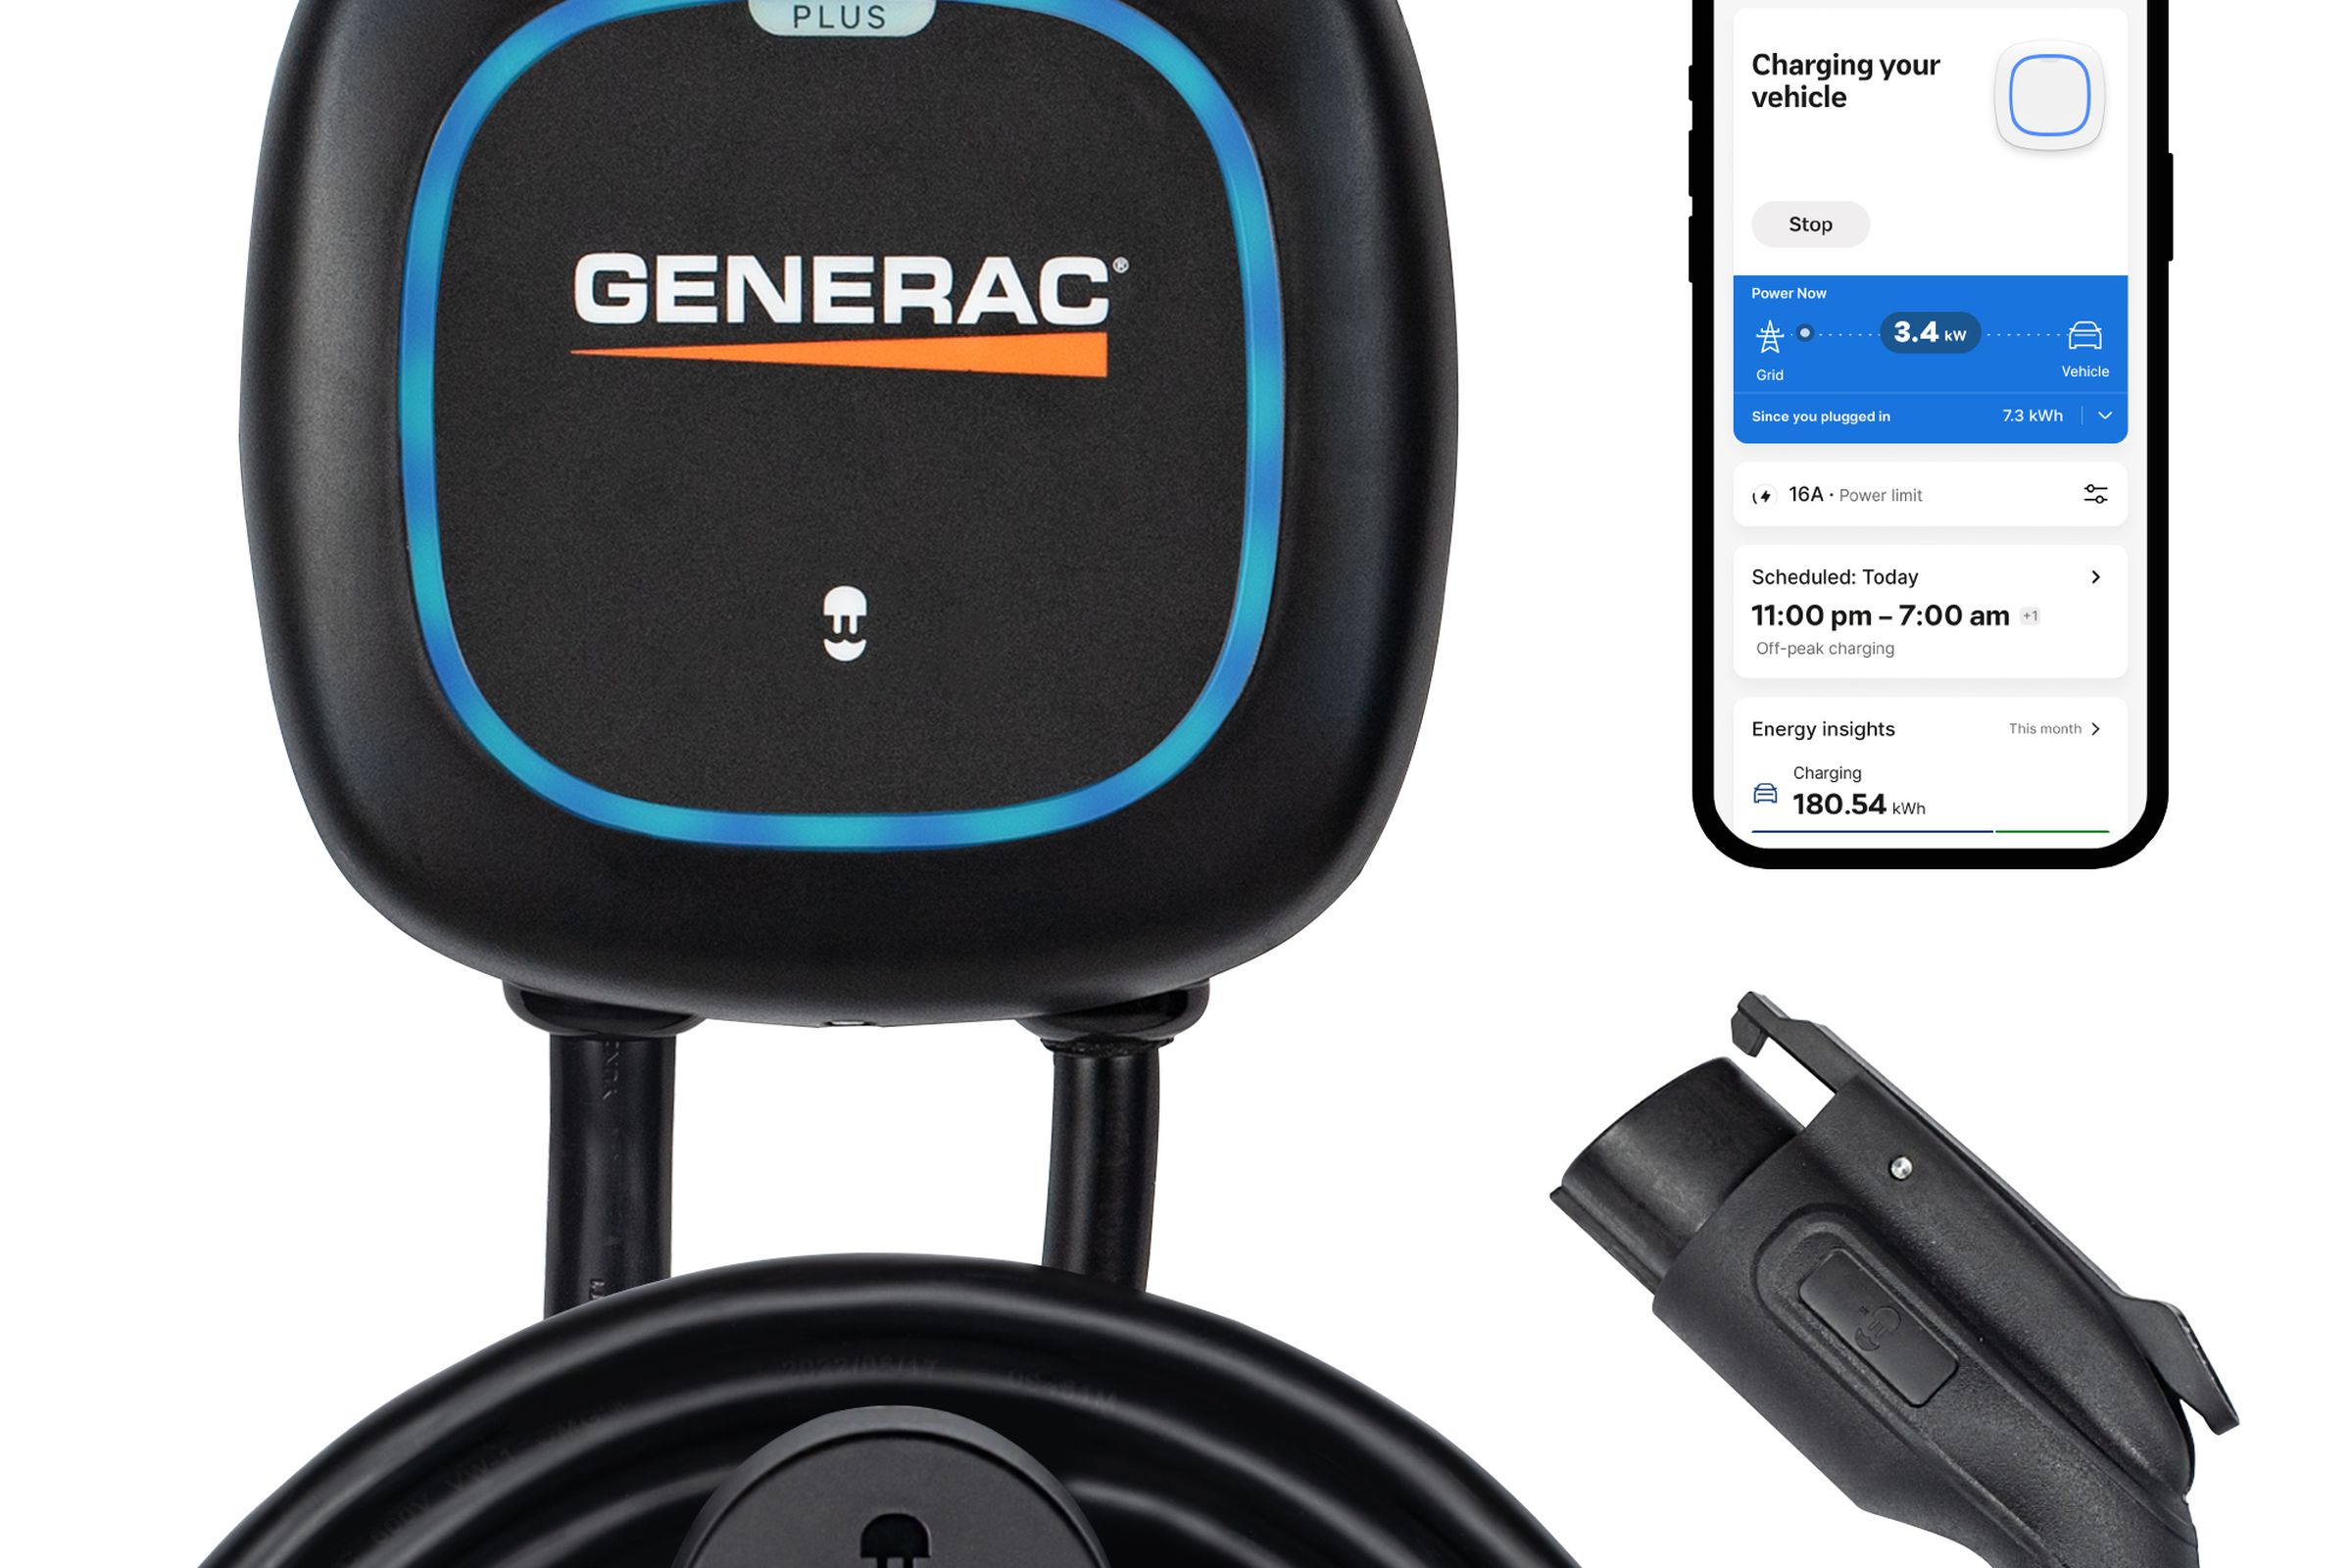 The Generac EV charger starts at $649.